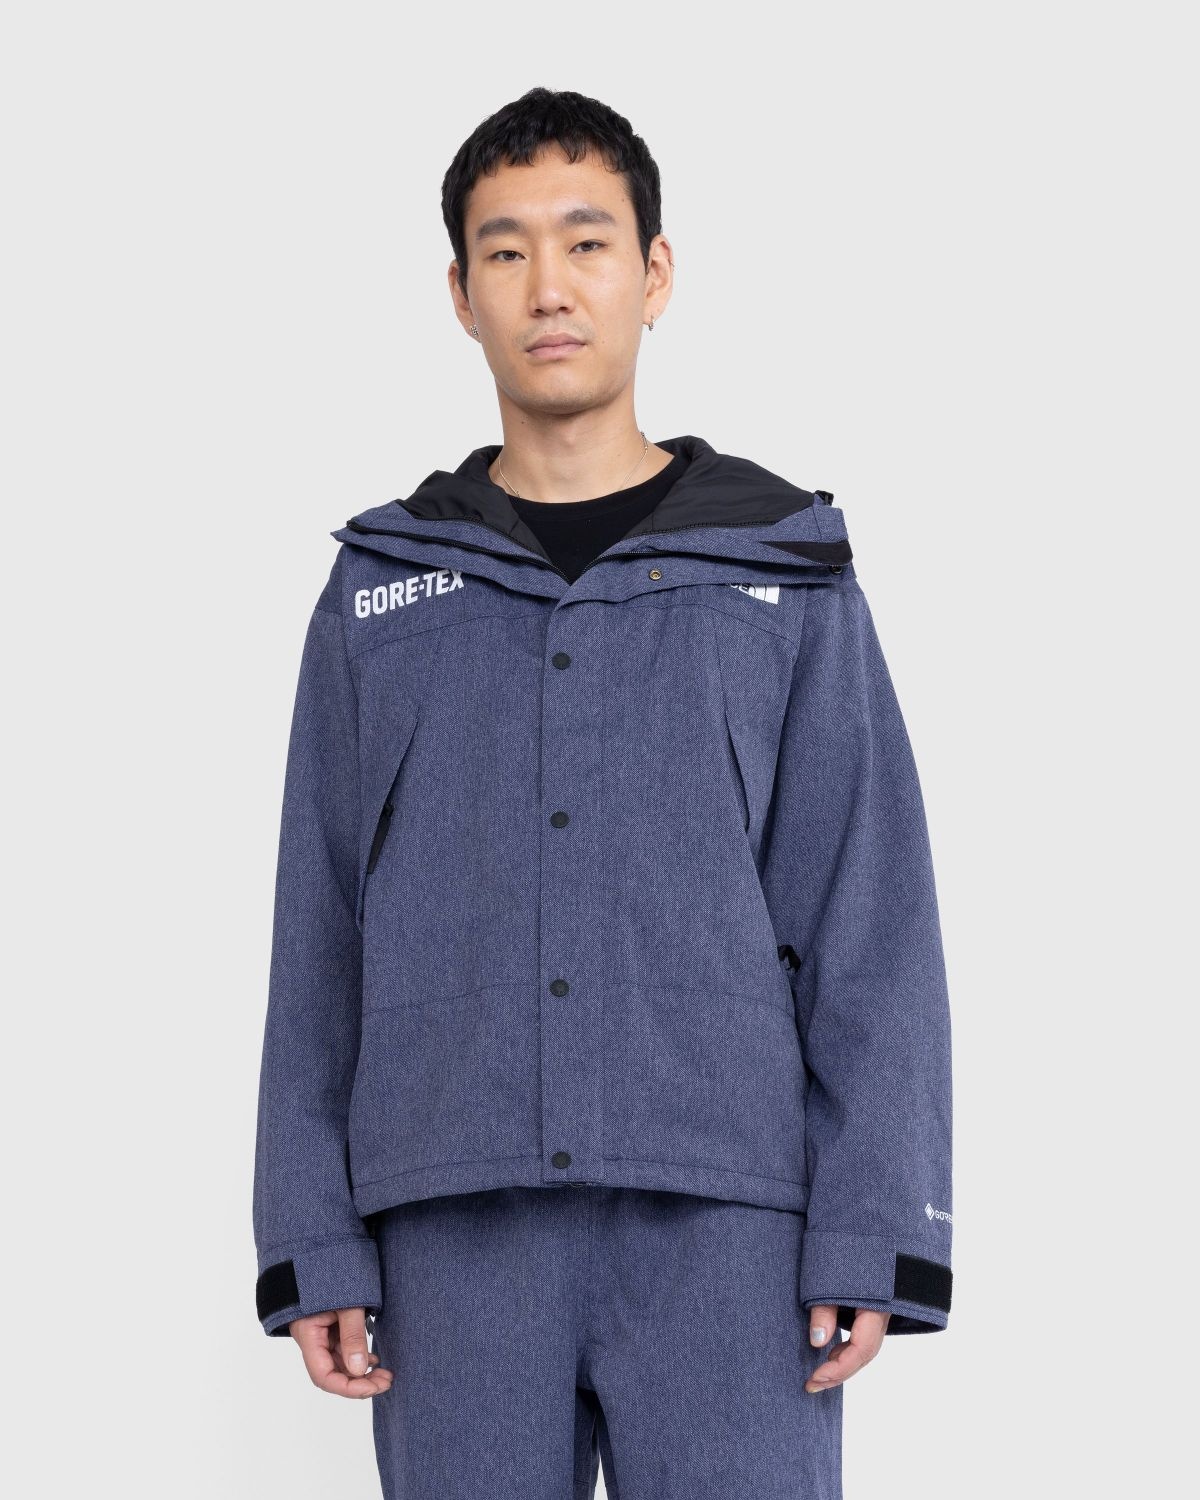 The North Face The North Face – GORE TEX Mountain Jacket Denim